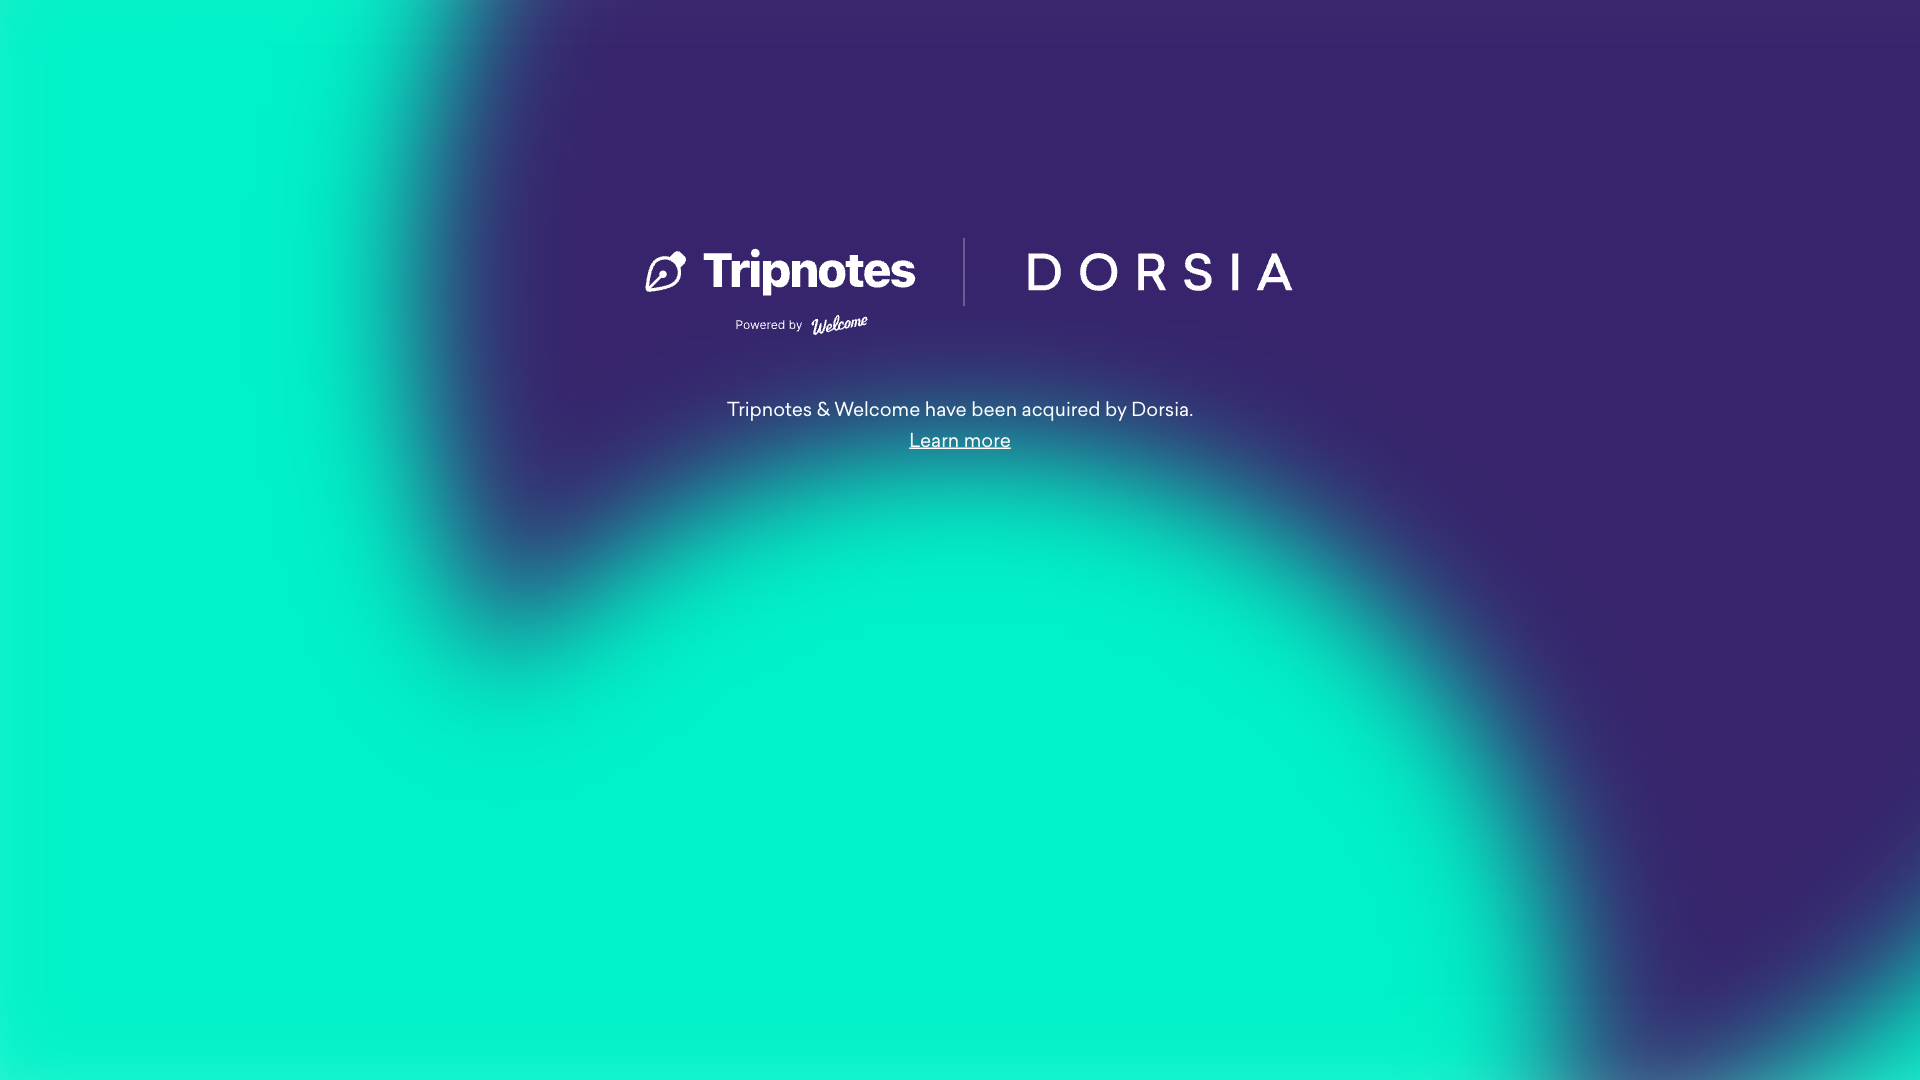 Display image for Tripnotes